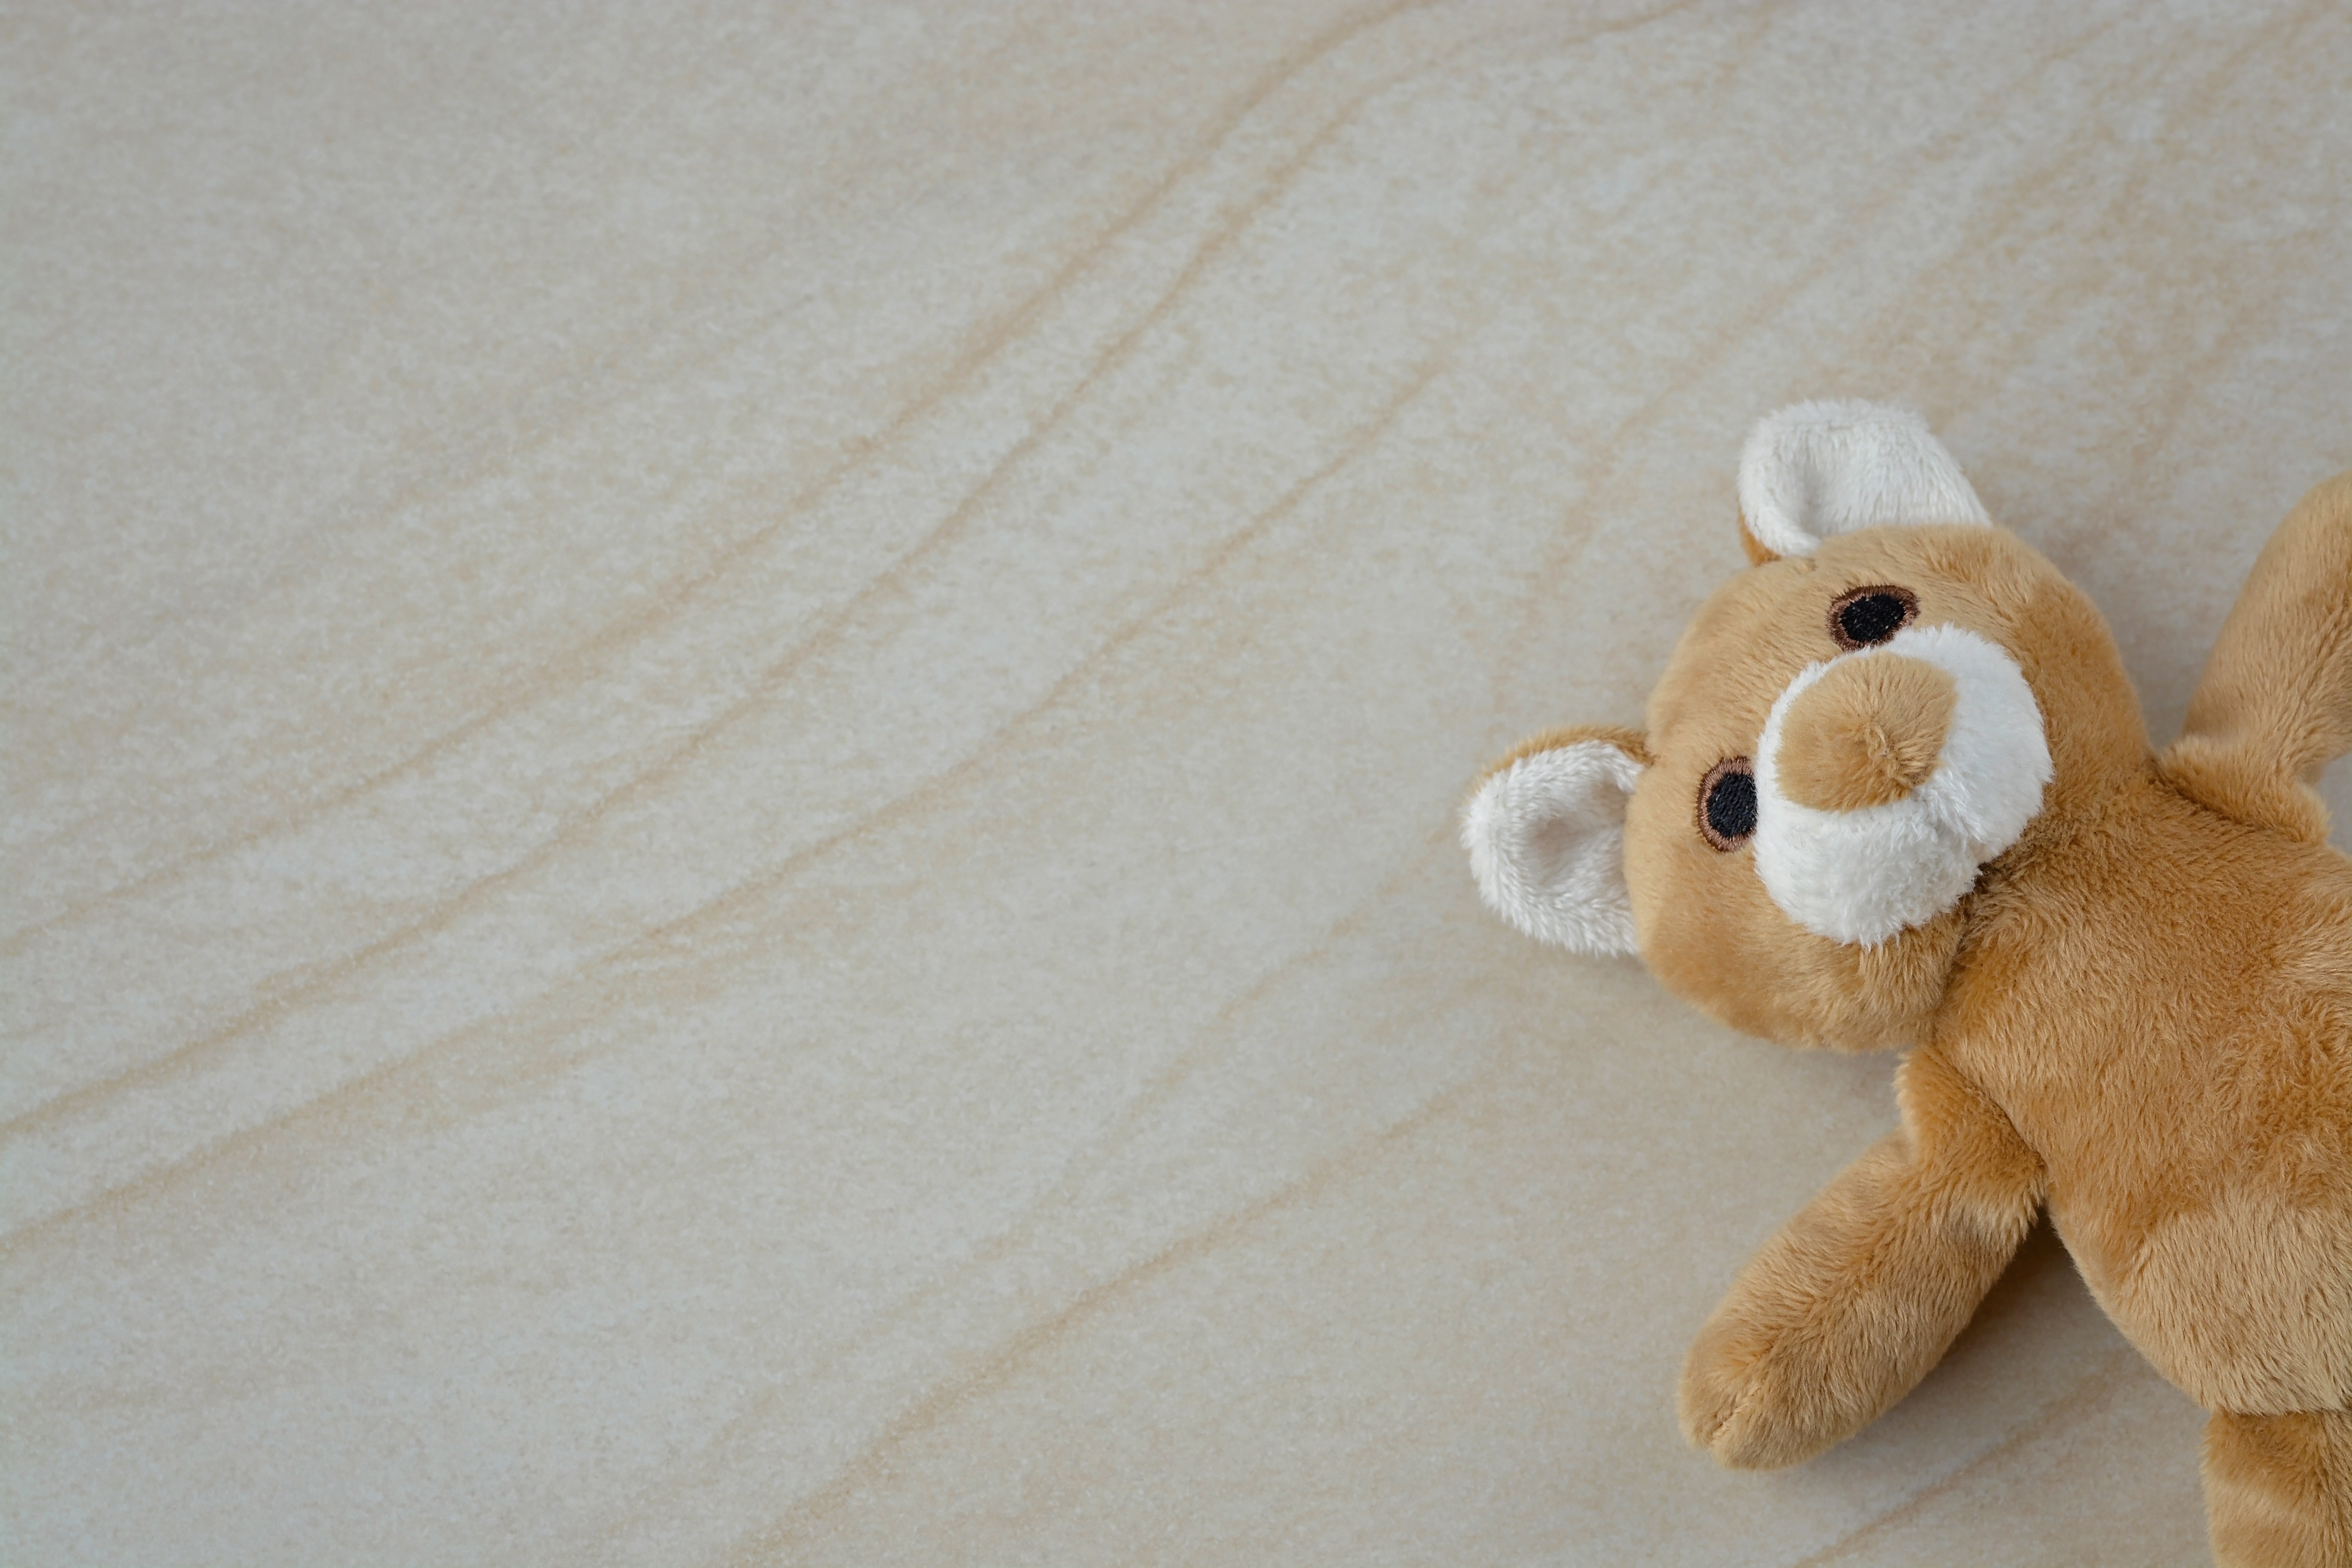 brown and white bear plush toy